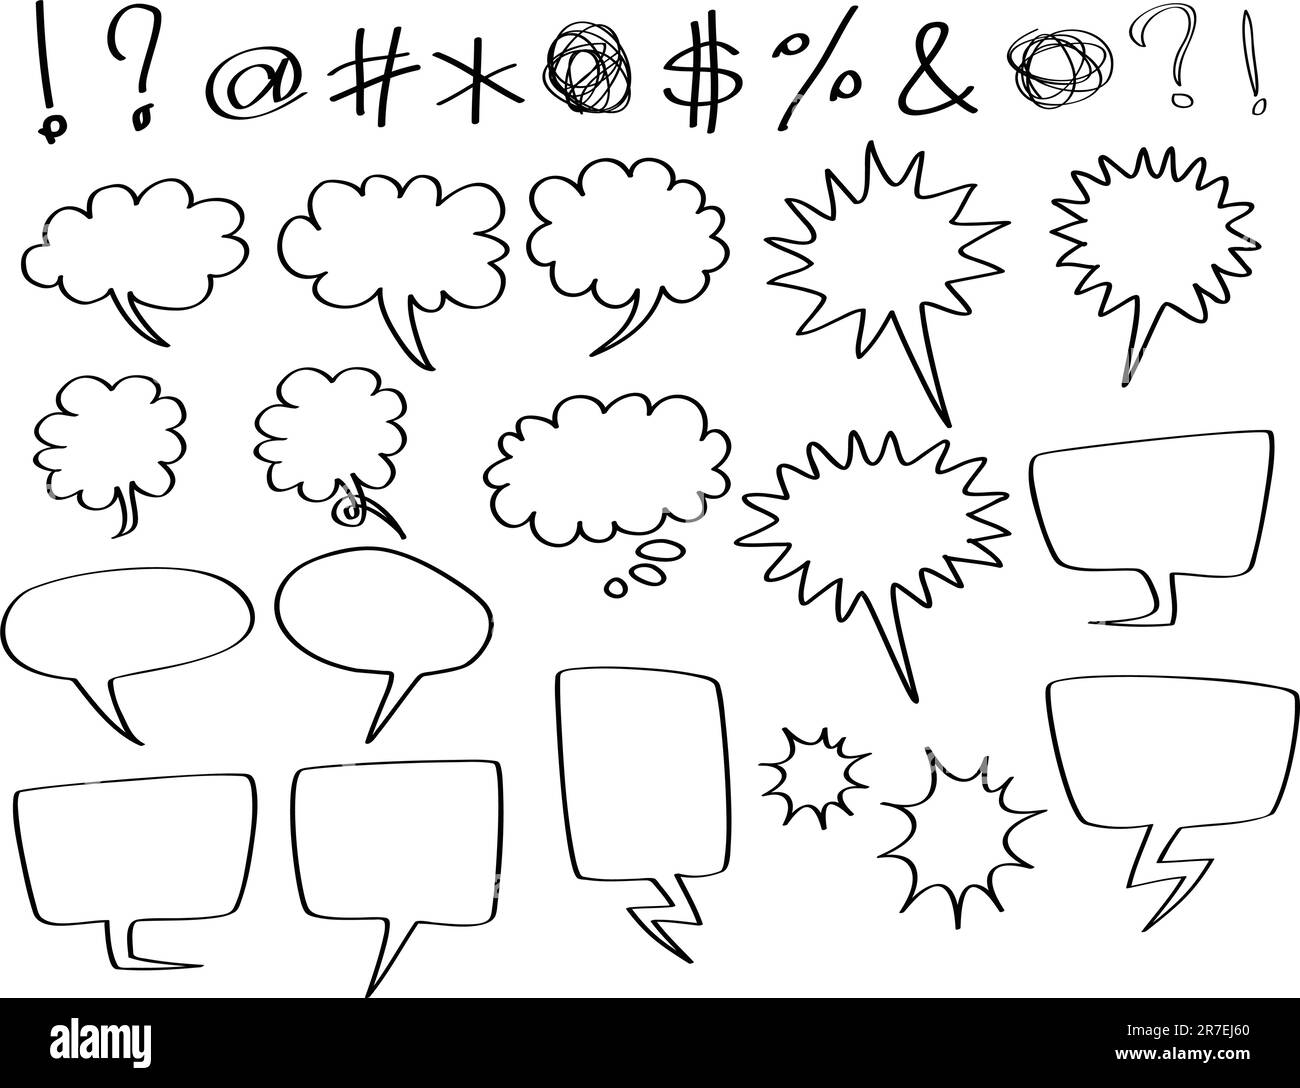 hand-drawn speech and thought bubbles, in comic style. Stock Vector